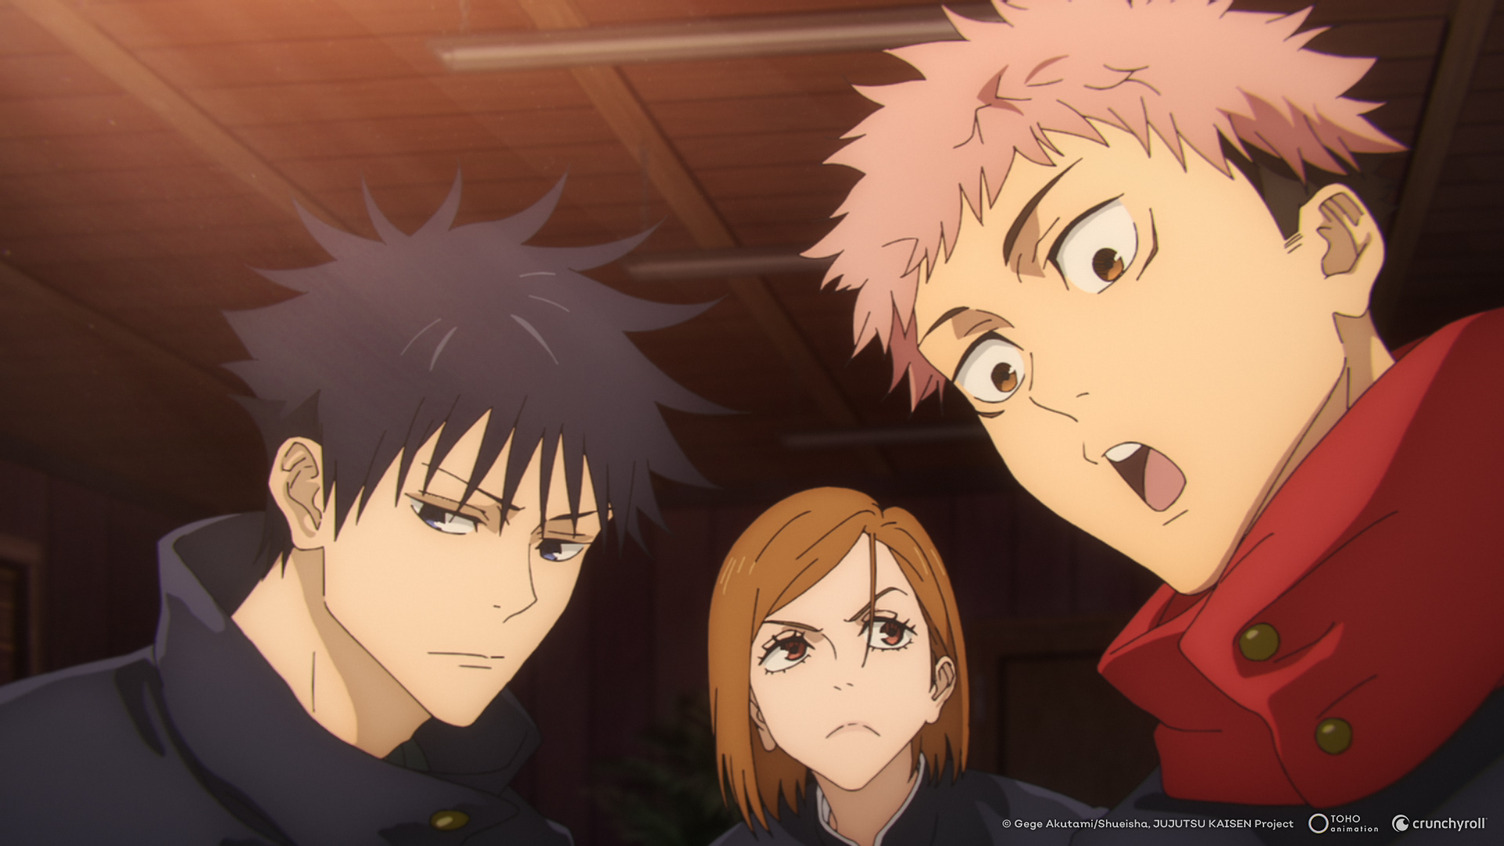 New Twist in Anime World: Jujutsu Kaisen Season 2's Latest Episode Faces Unexpected One-Day Delay